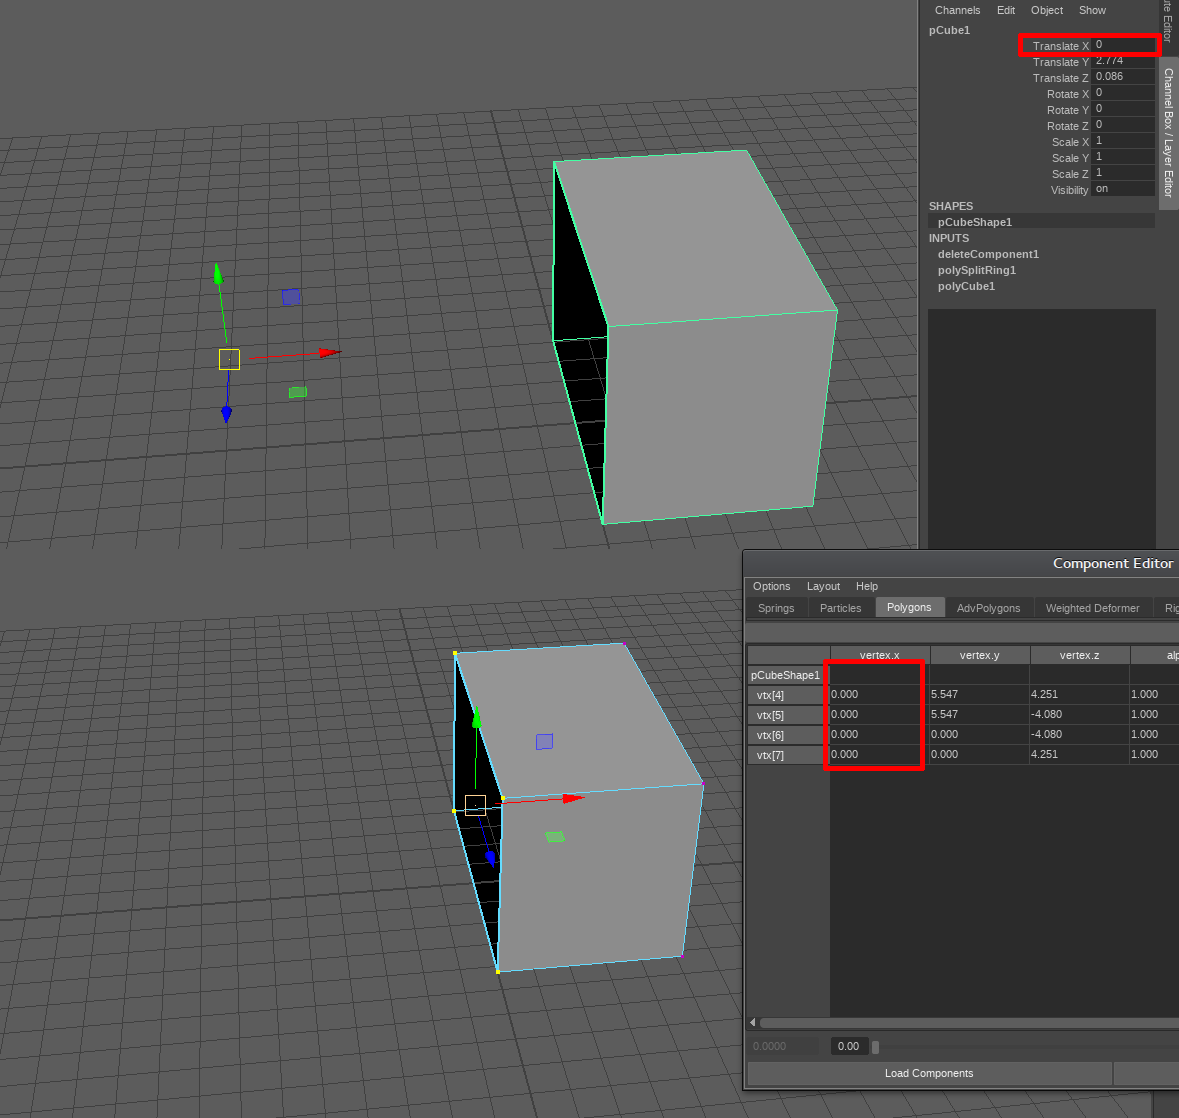 Death jaw protein believe how difficult would it be to add a move / snap function to the pivot point?  - Basics & Interface - Blender Artists Community